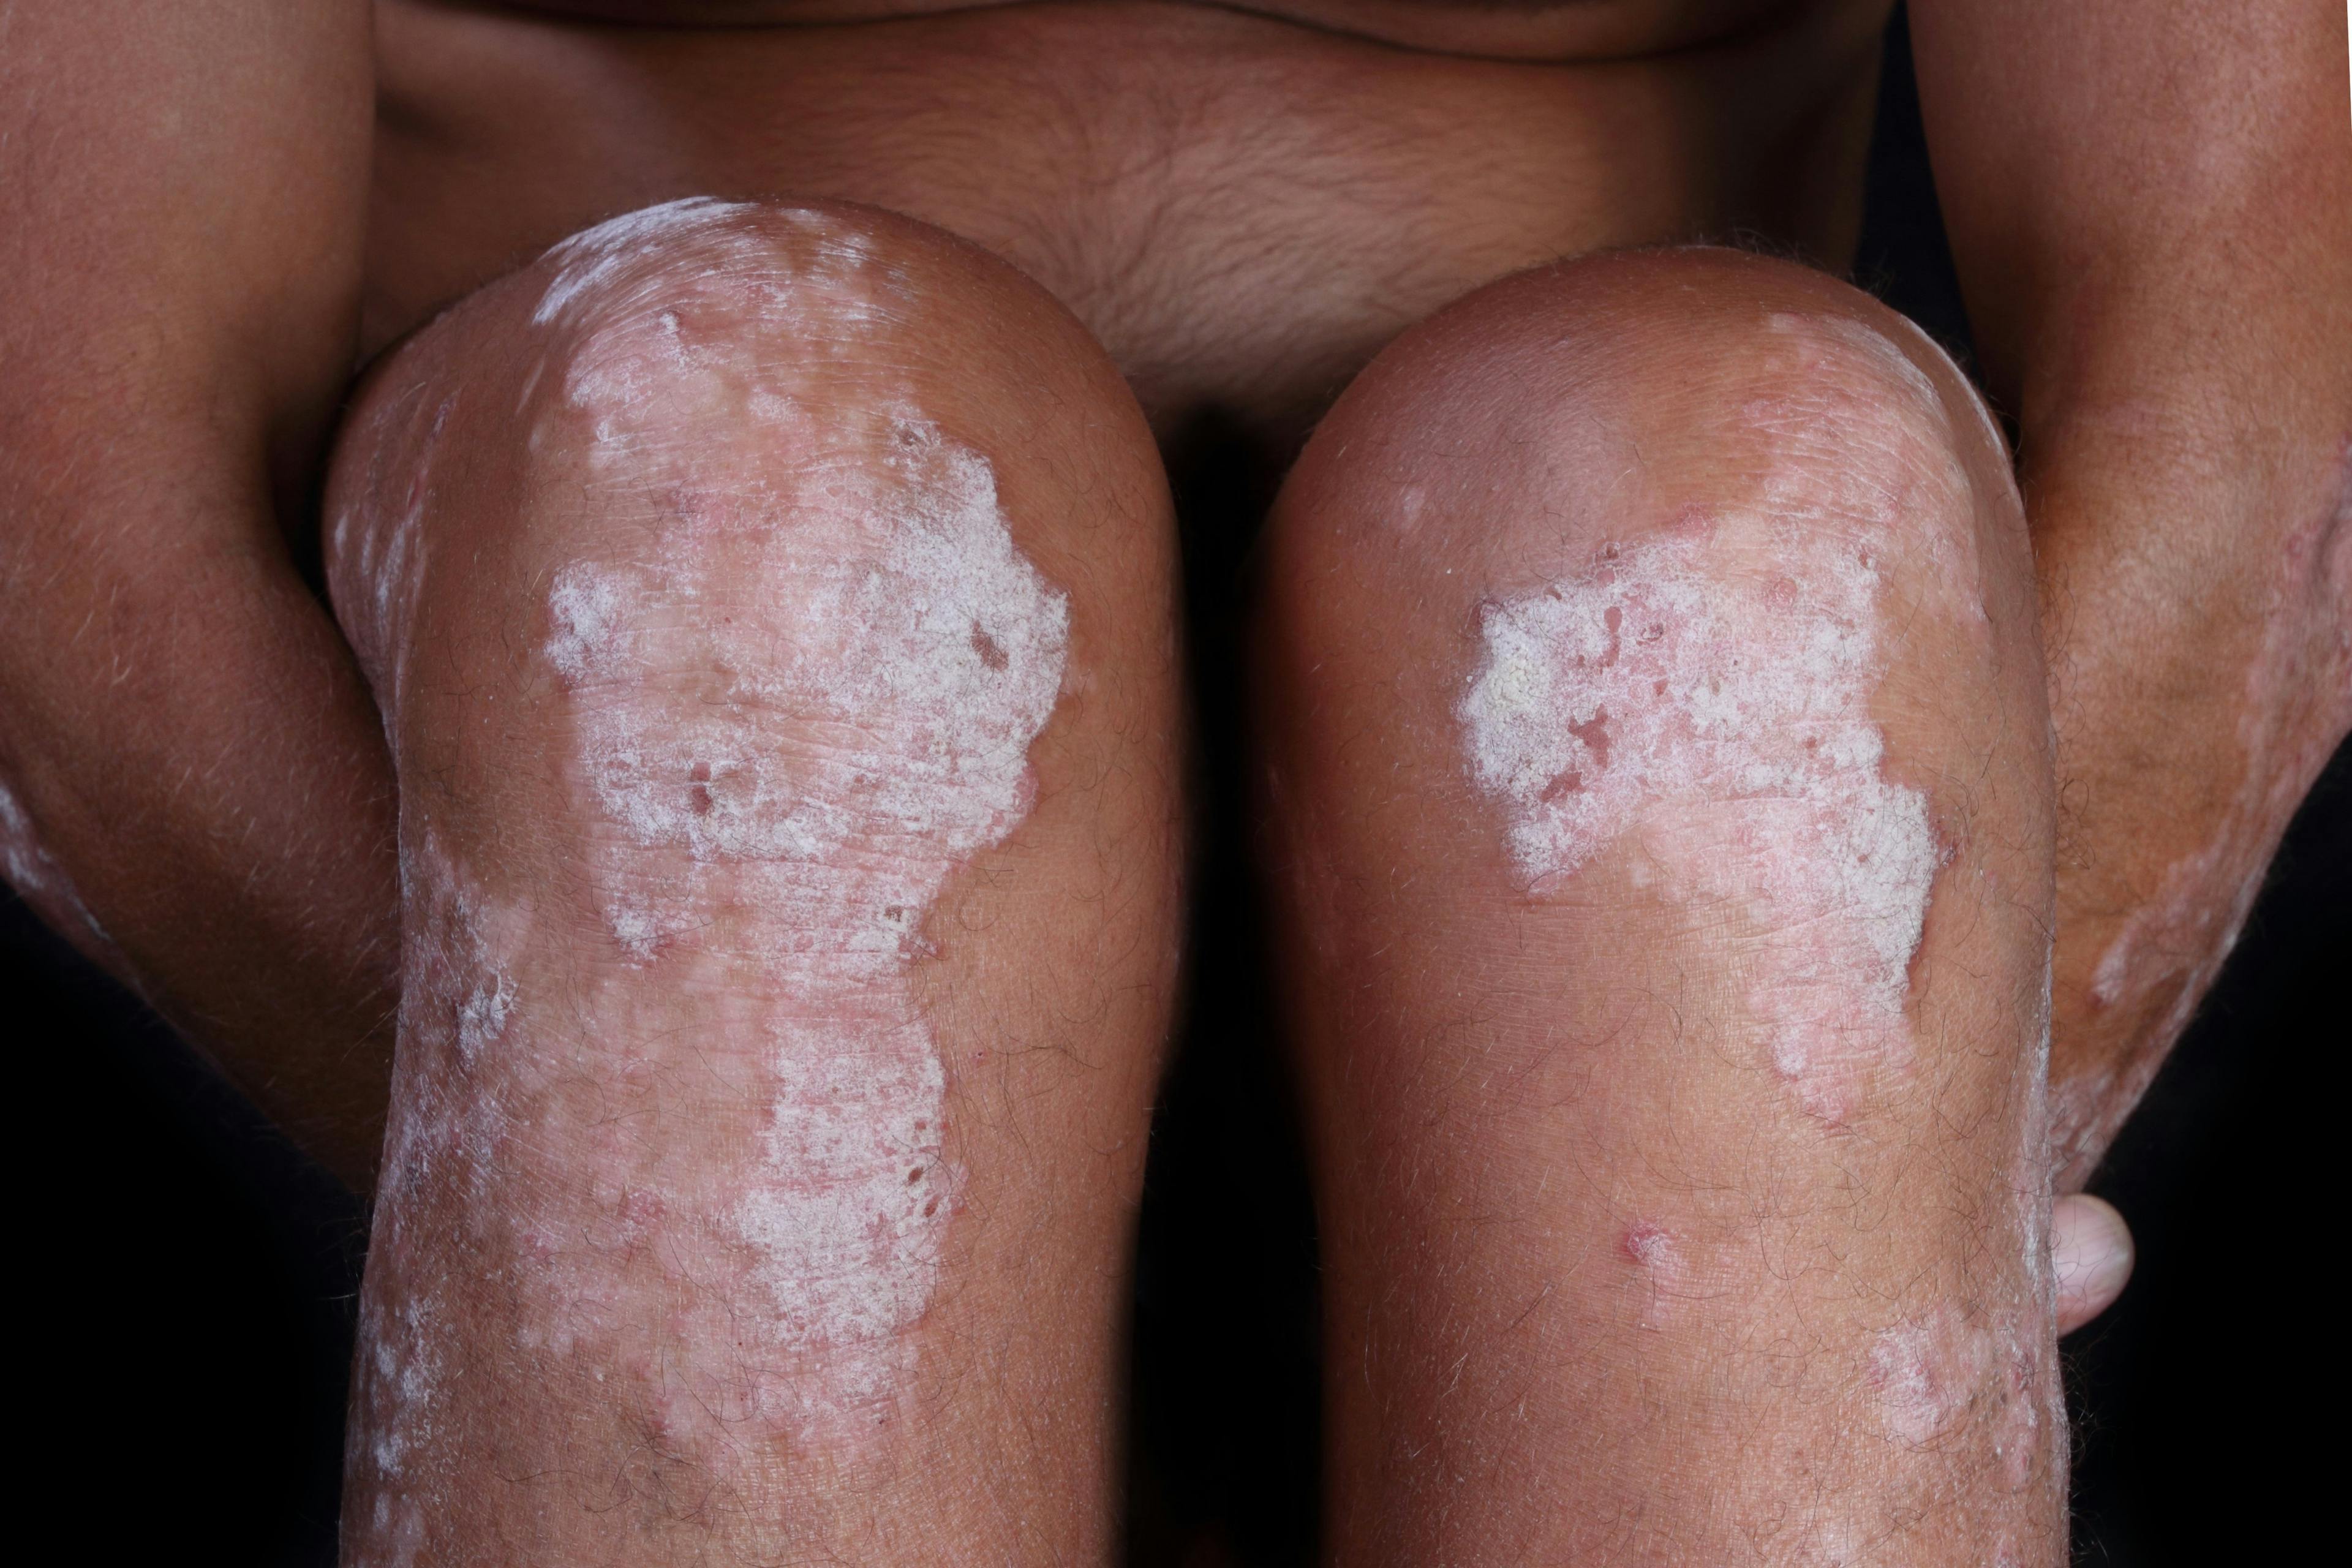 patches of dry, flaky skin on knees